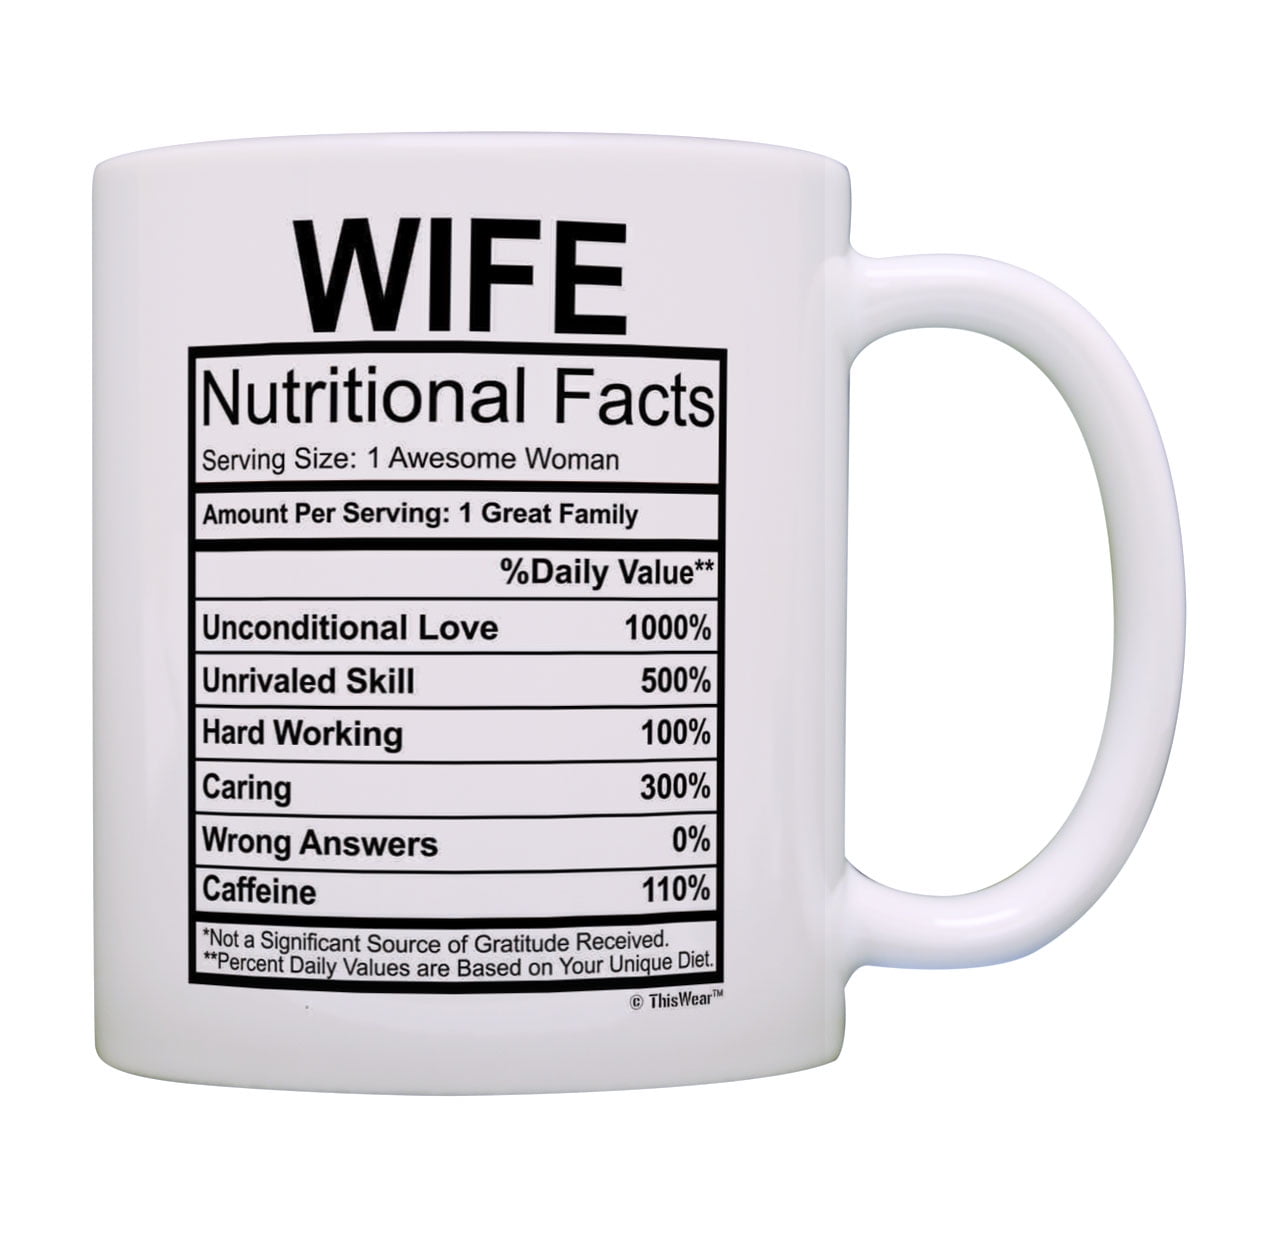 Wedding Anniversary Gifts Wife Nutrition Facts Serving Size 1 Coffee Mug Tea Cup 